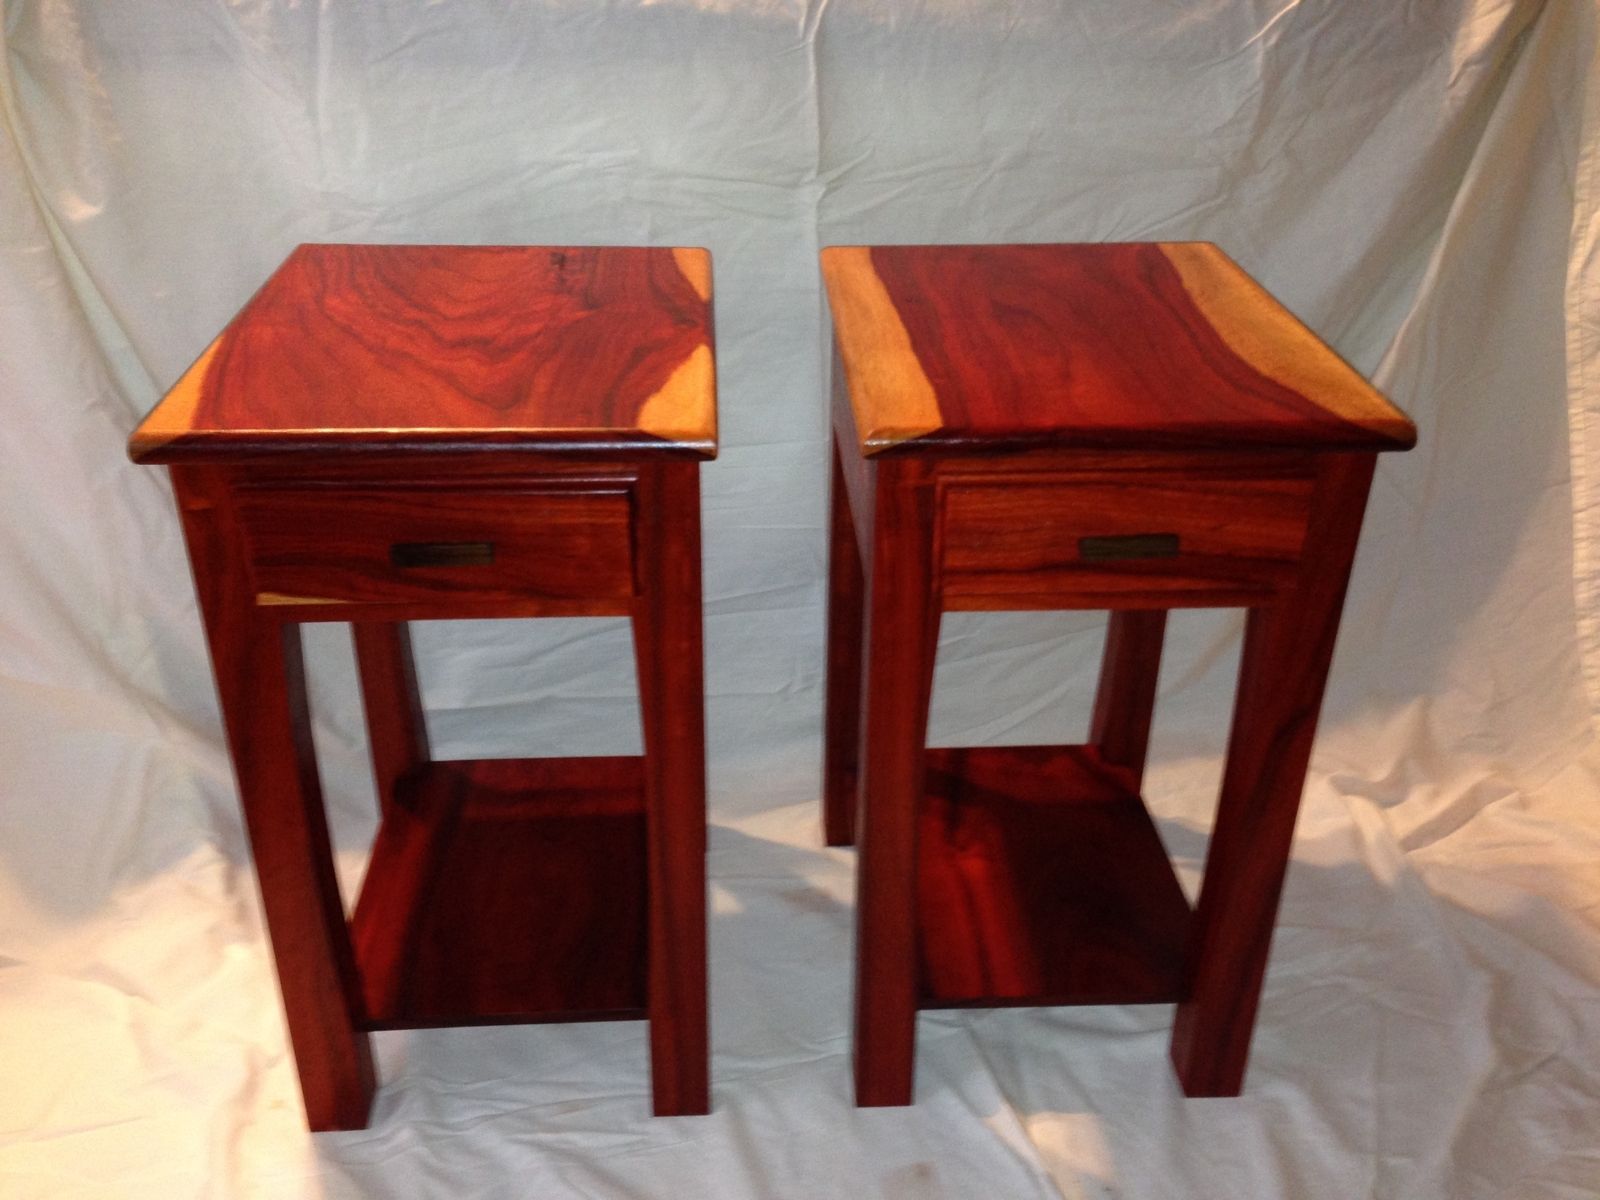 matching side tables in living room